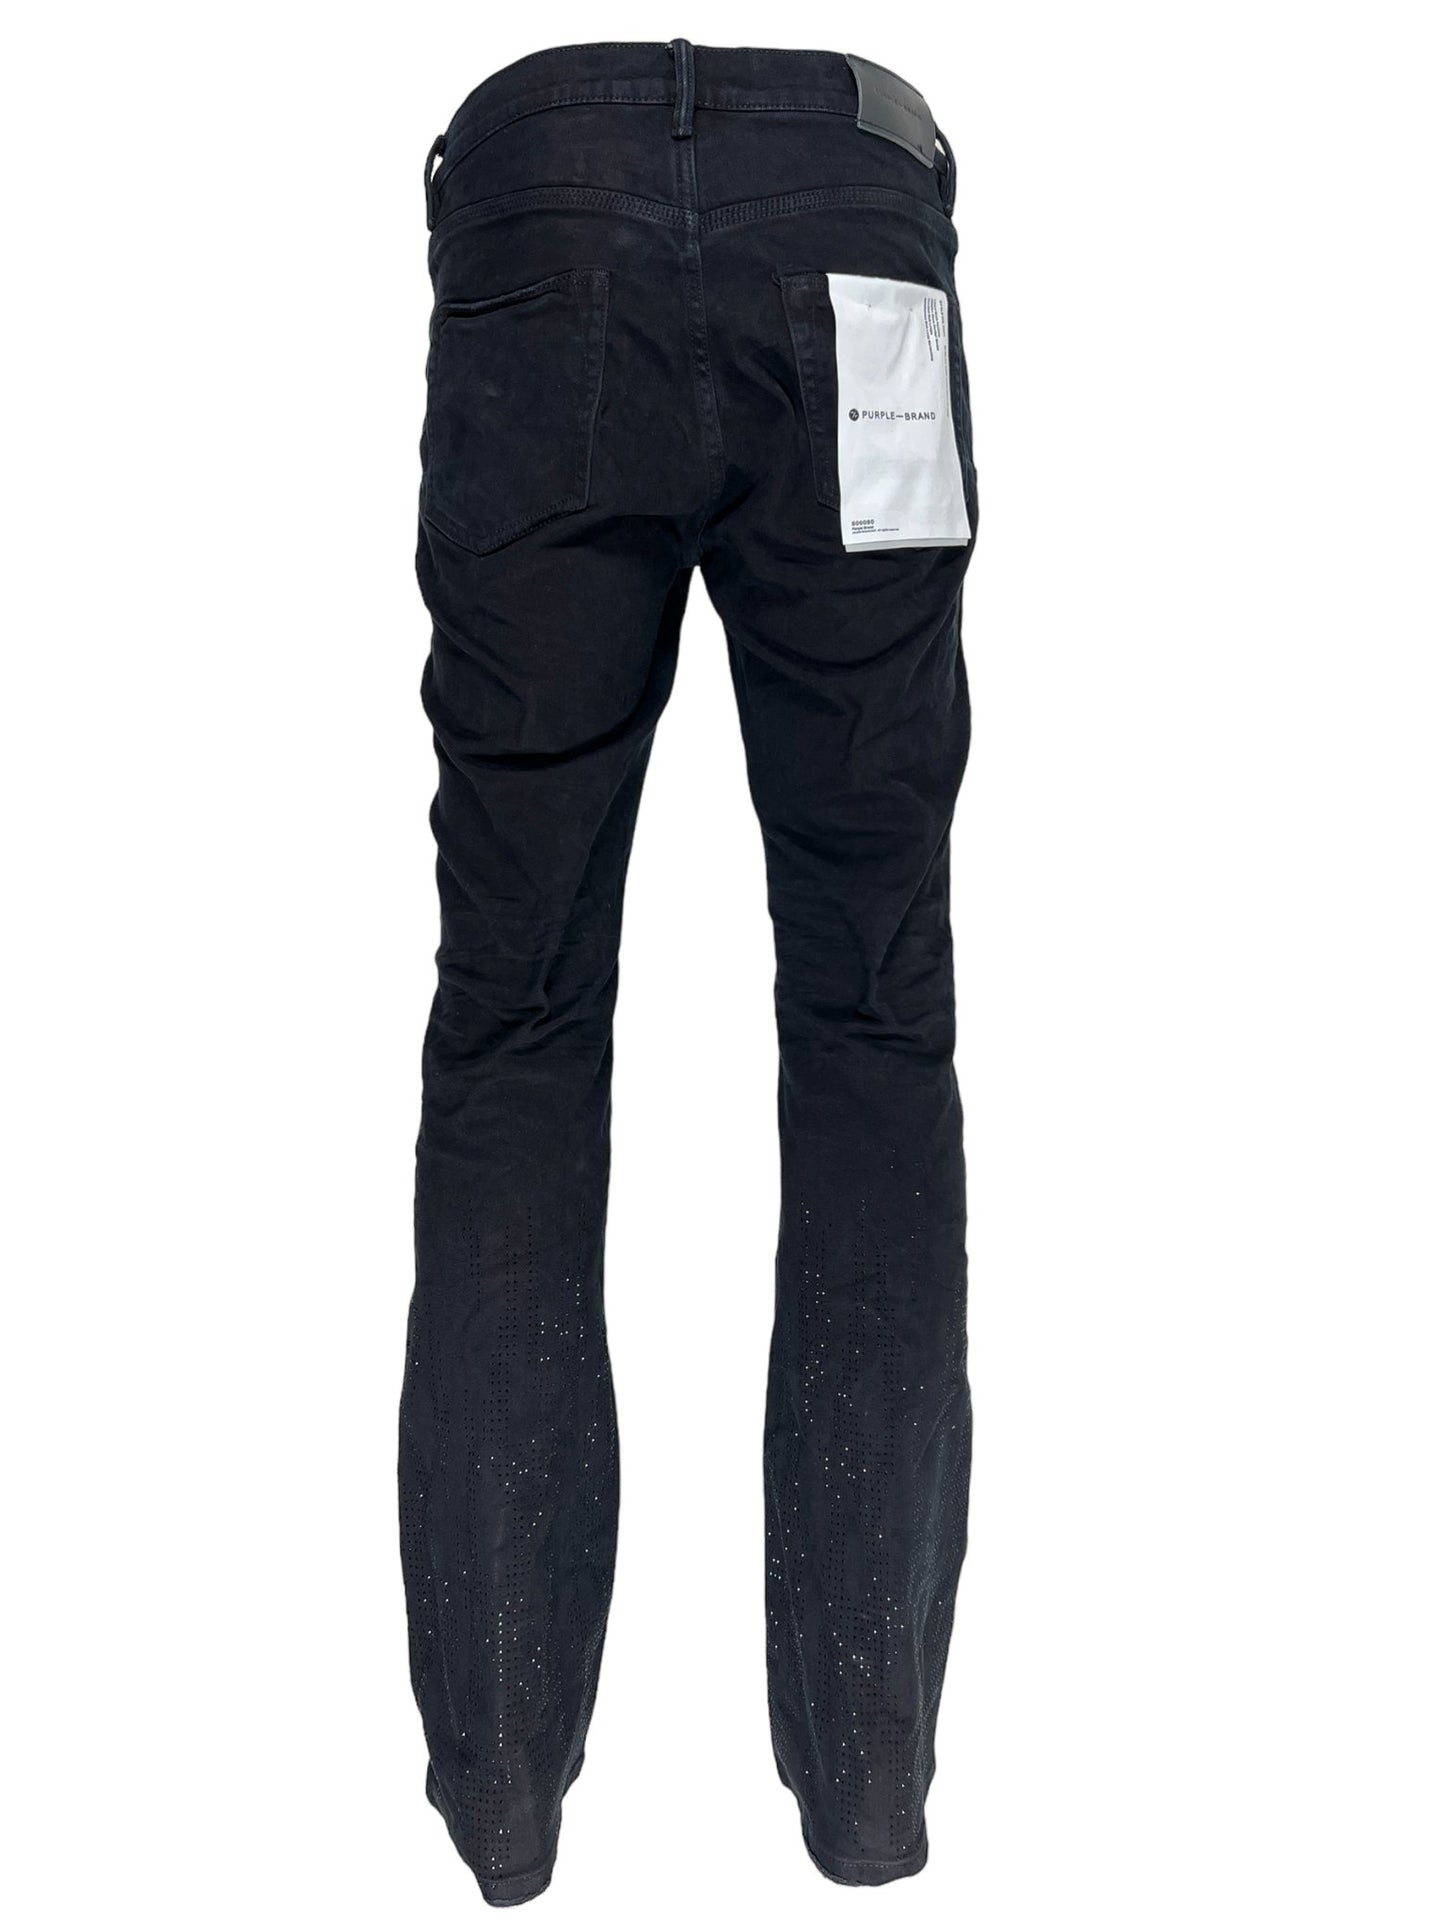 The back view of a pair of PURPLE BRAND P004-FFBL FLAMED FLARE BLACK jeans.